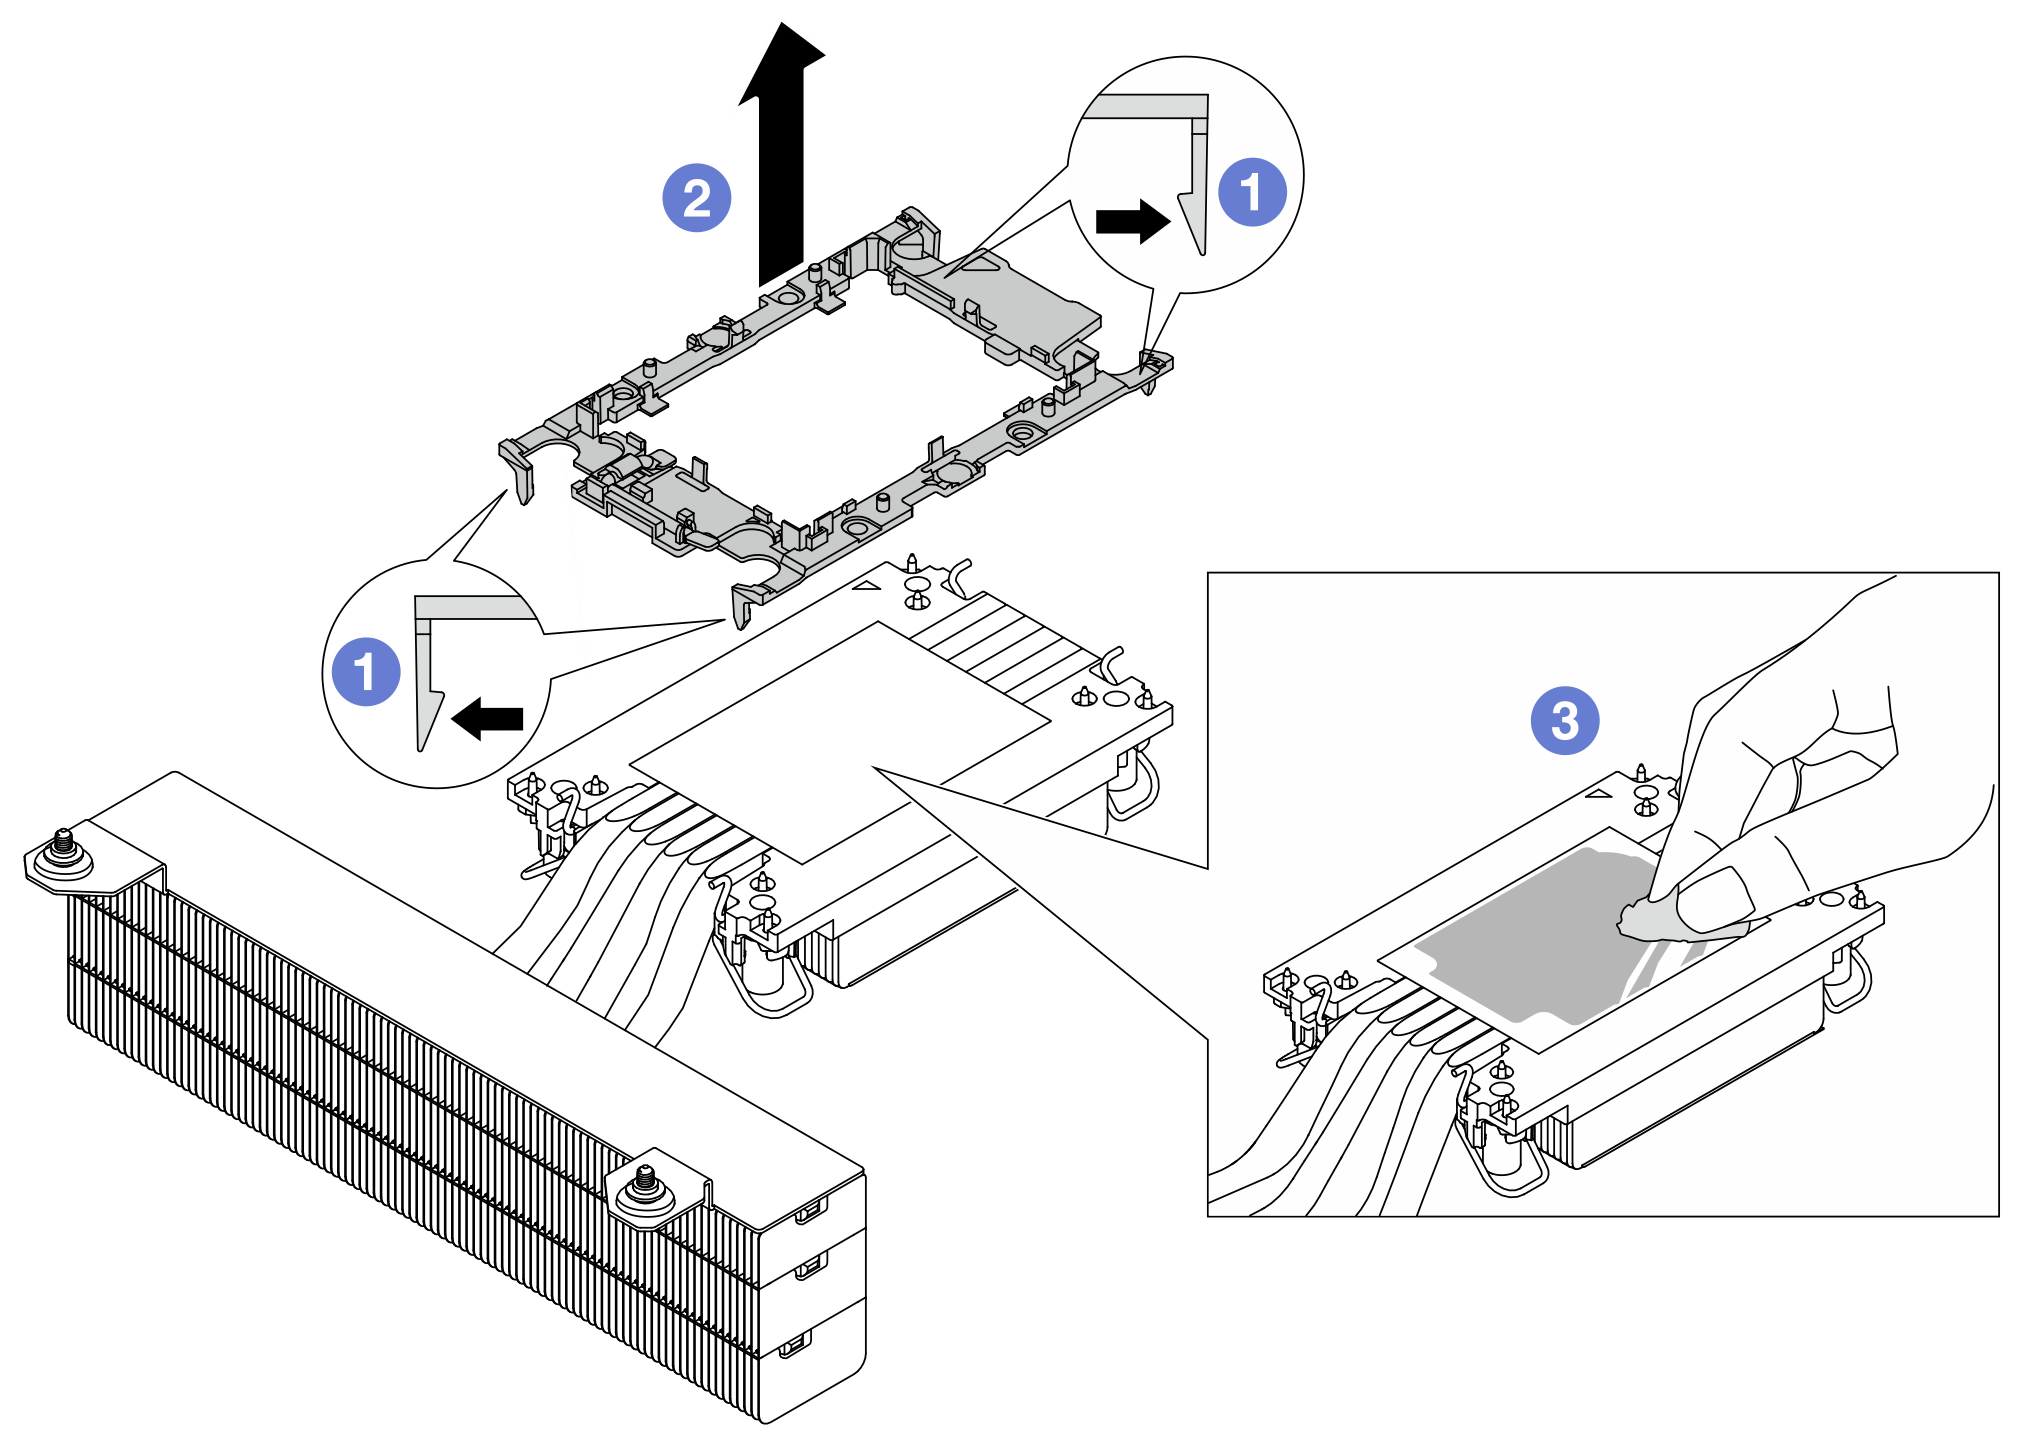 Separating a processor carrier the from heat sink